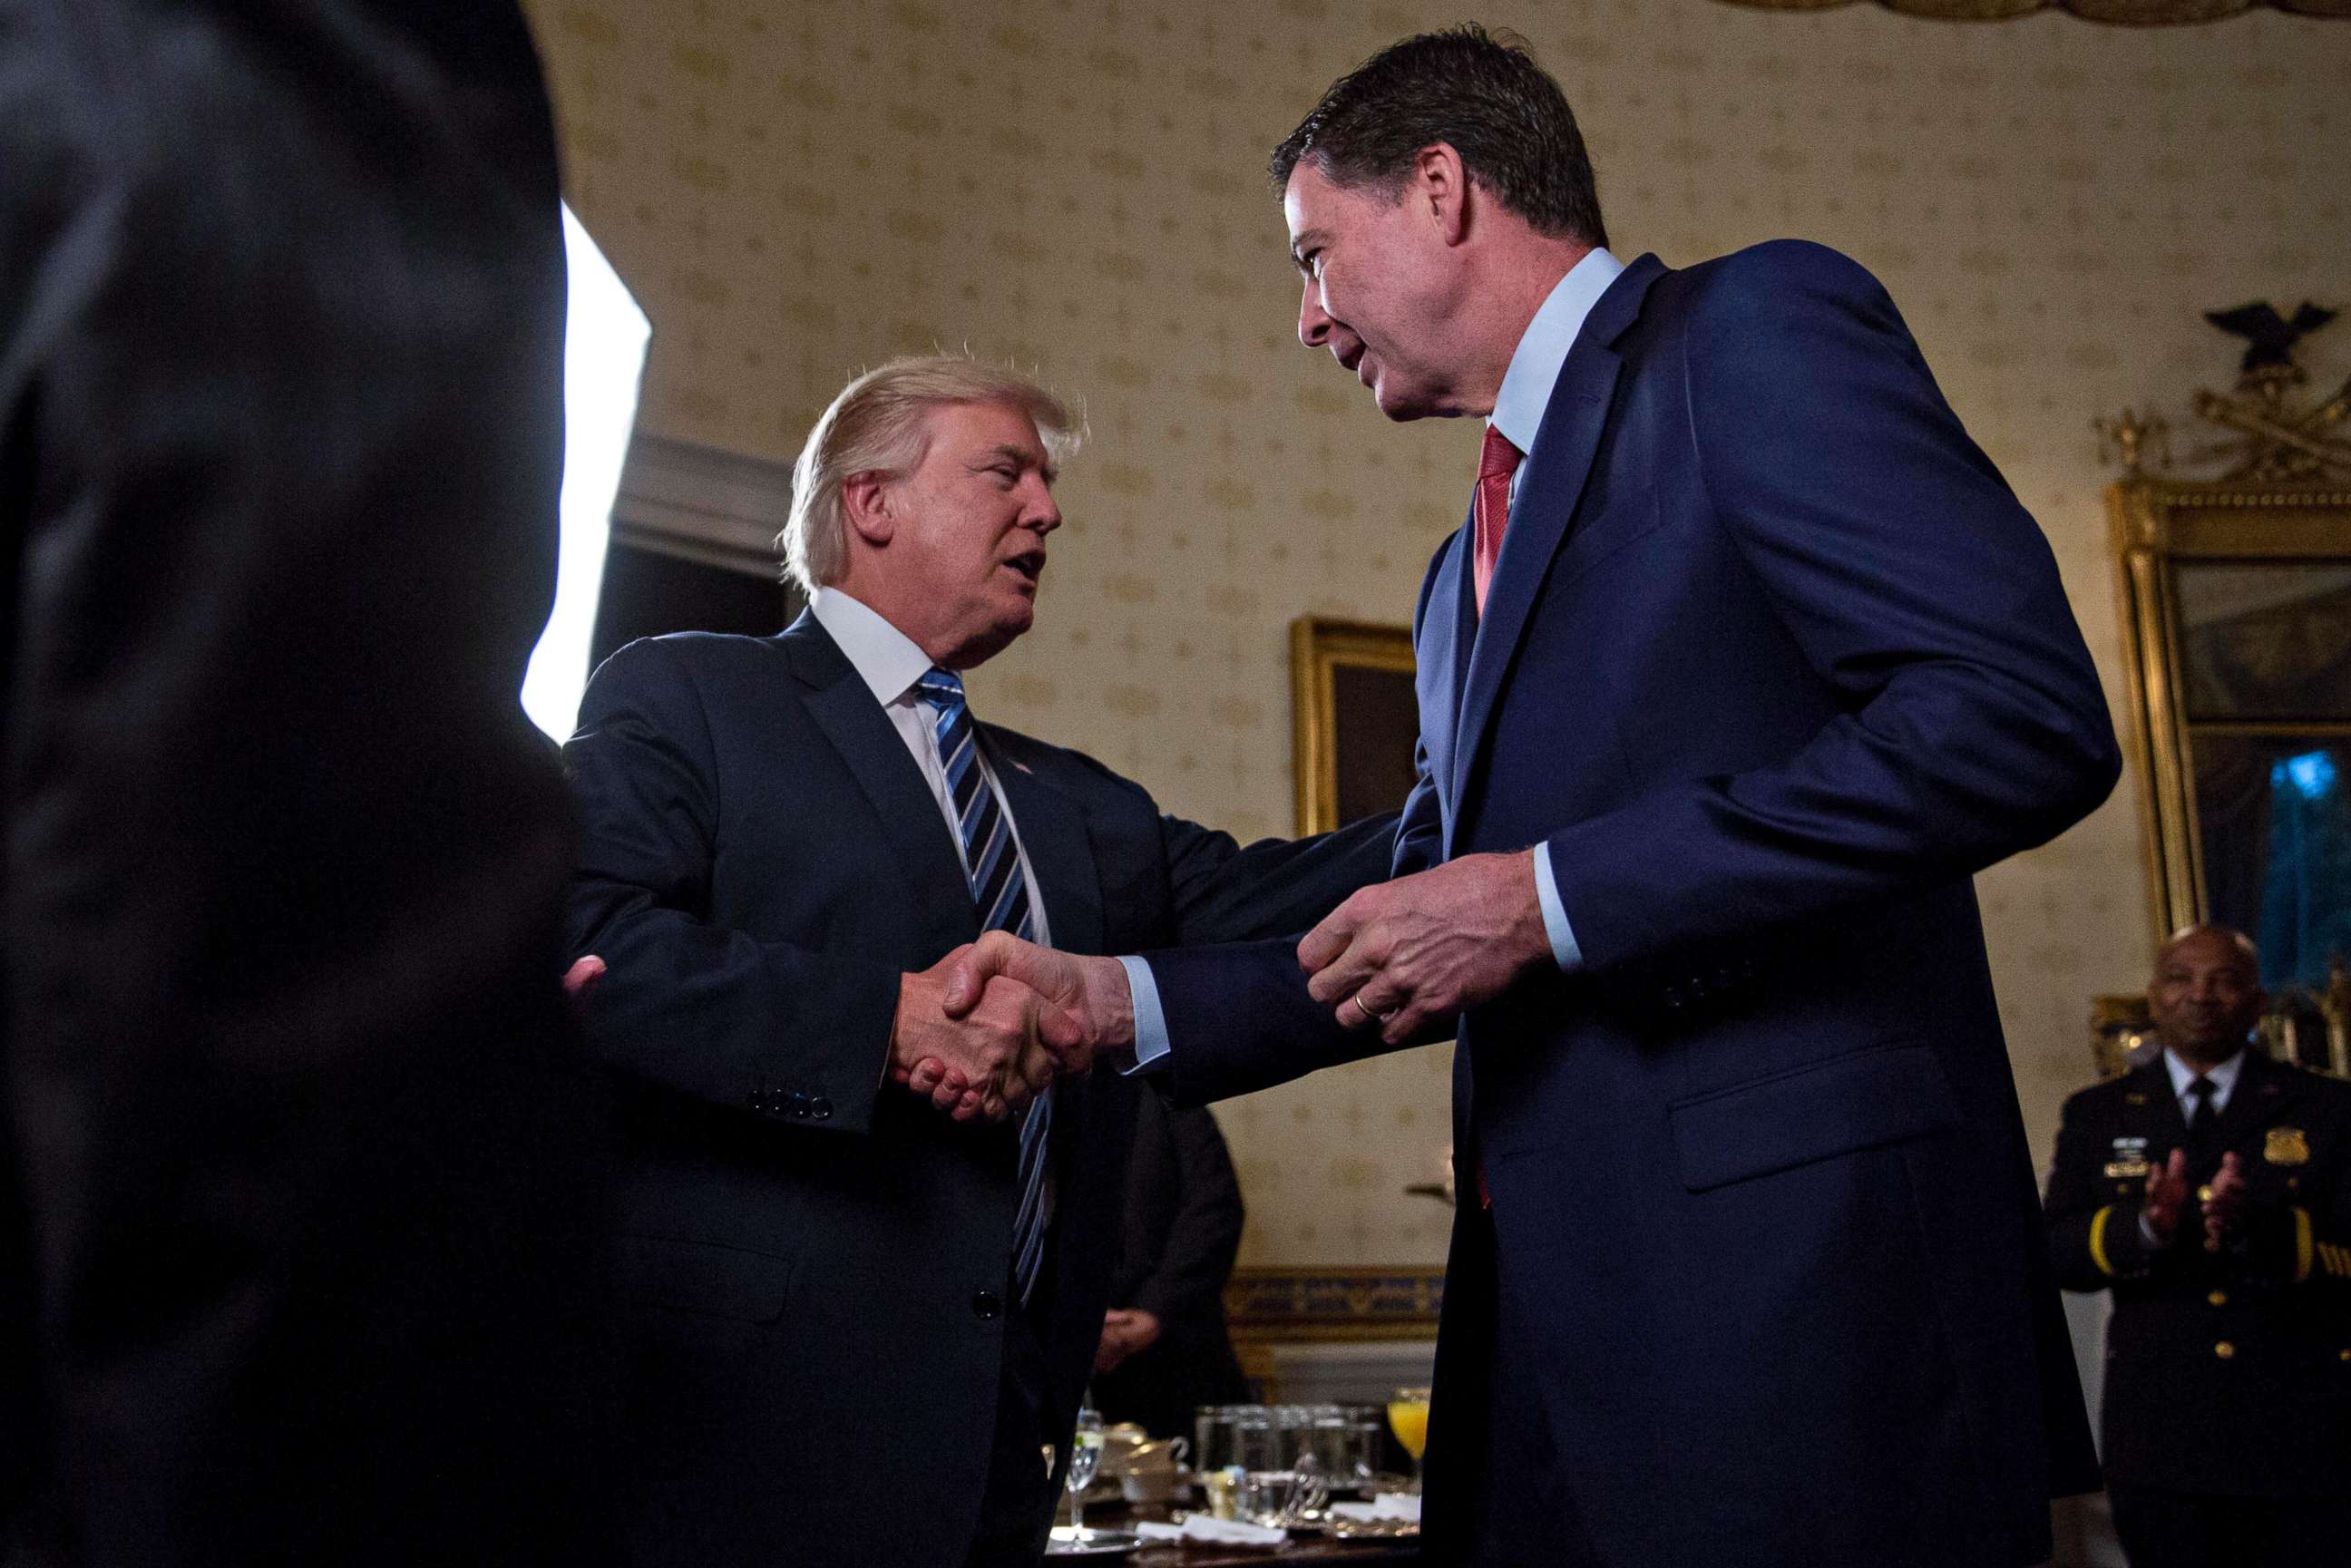 PHOTO: Donald Trump shakes hands with James Comey, during an Inaugural Law Enforcement Officers and First Responders Reception, Jan. 22, 2017, in Washington.